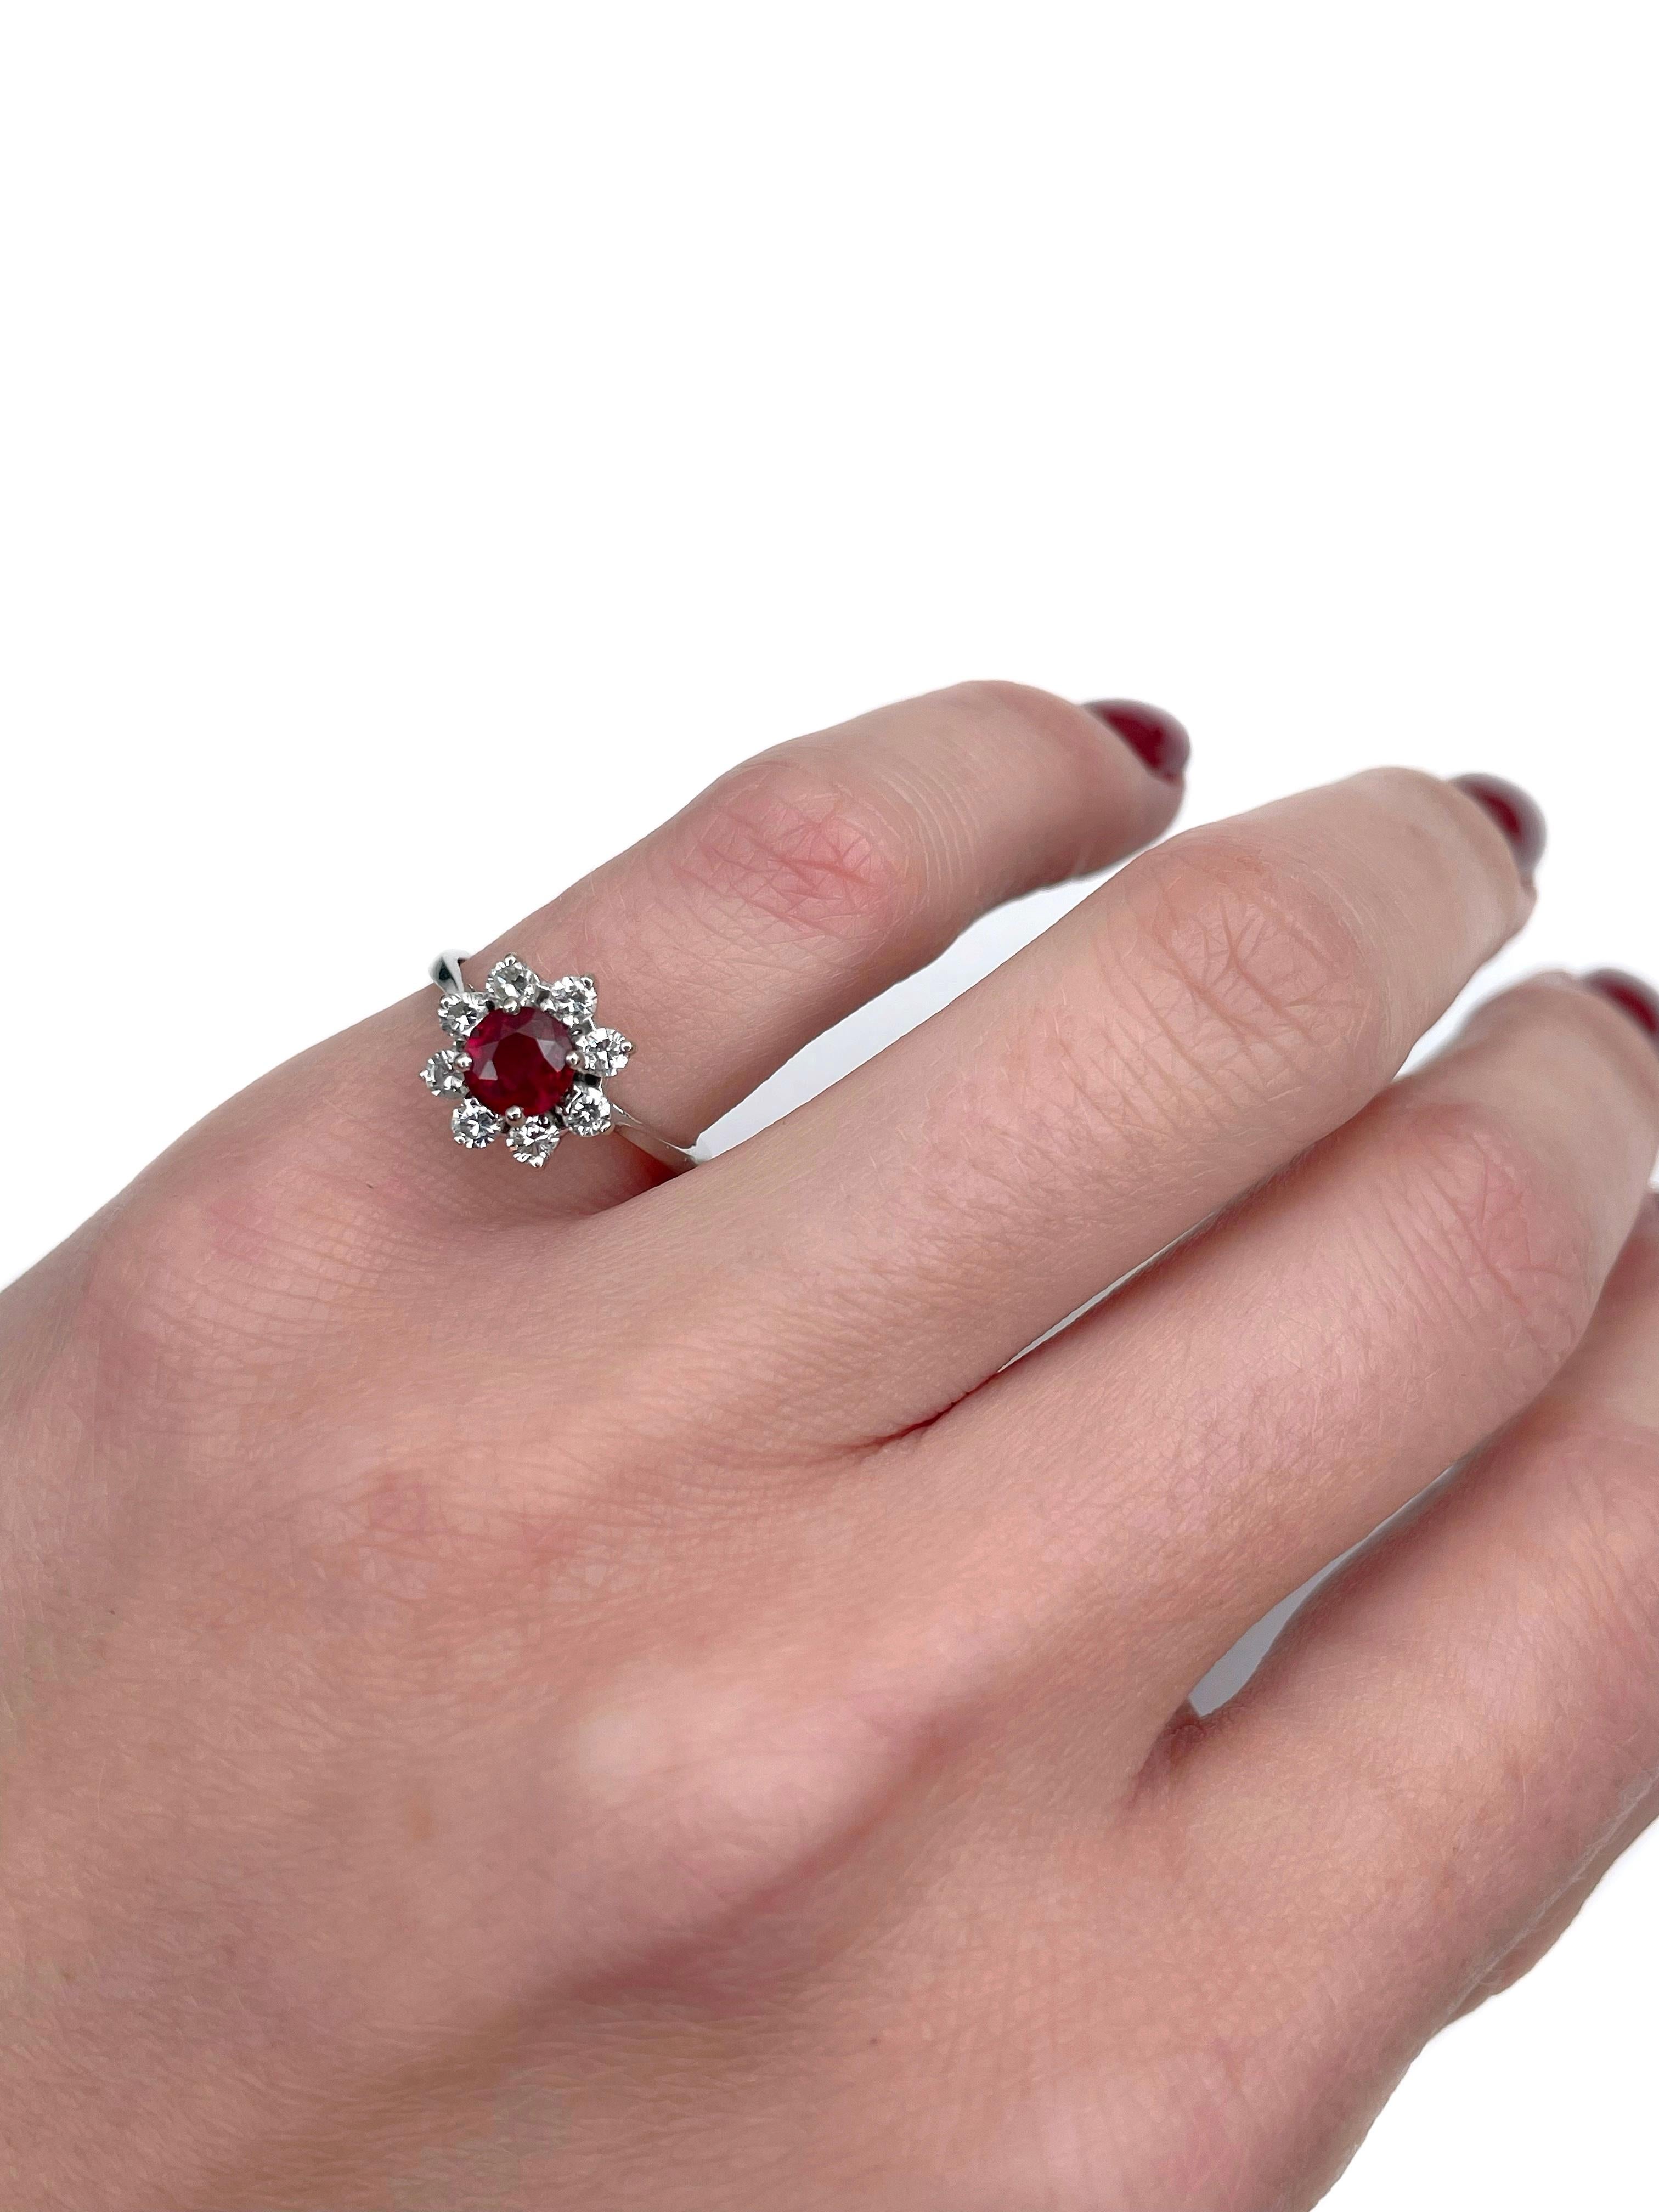 This is a vintage cluster ring crafted in 18K white gold. Circa 1990. 

The piece features:
- 1 ruby (round cut, 0.60ct, slpR 6/4, SI)
- 8 diamonds (round brilliant cut, TW 0.32ct, RW+/RW, VS-SI)

Weight: 2.45g
Size: 15.25 (US 4.5)

IMPORTANT: